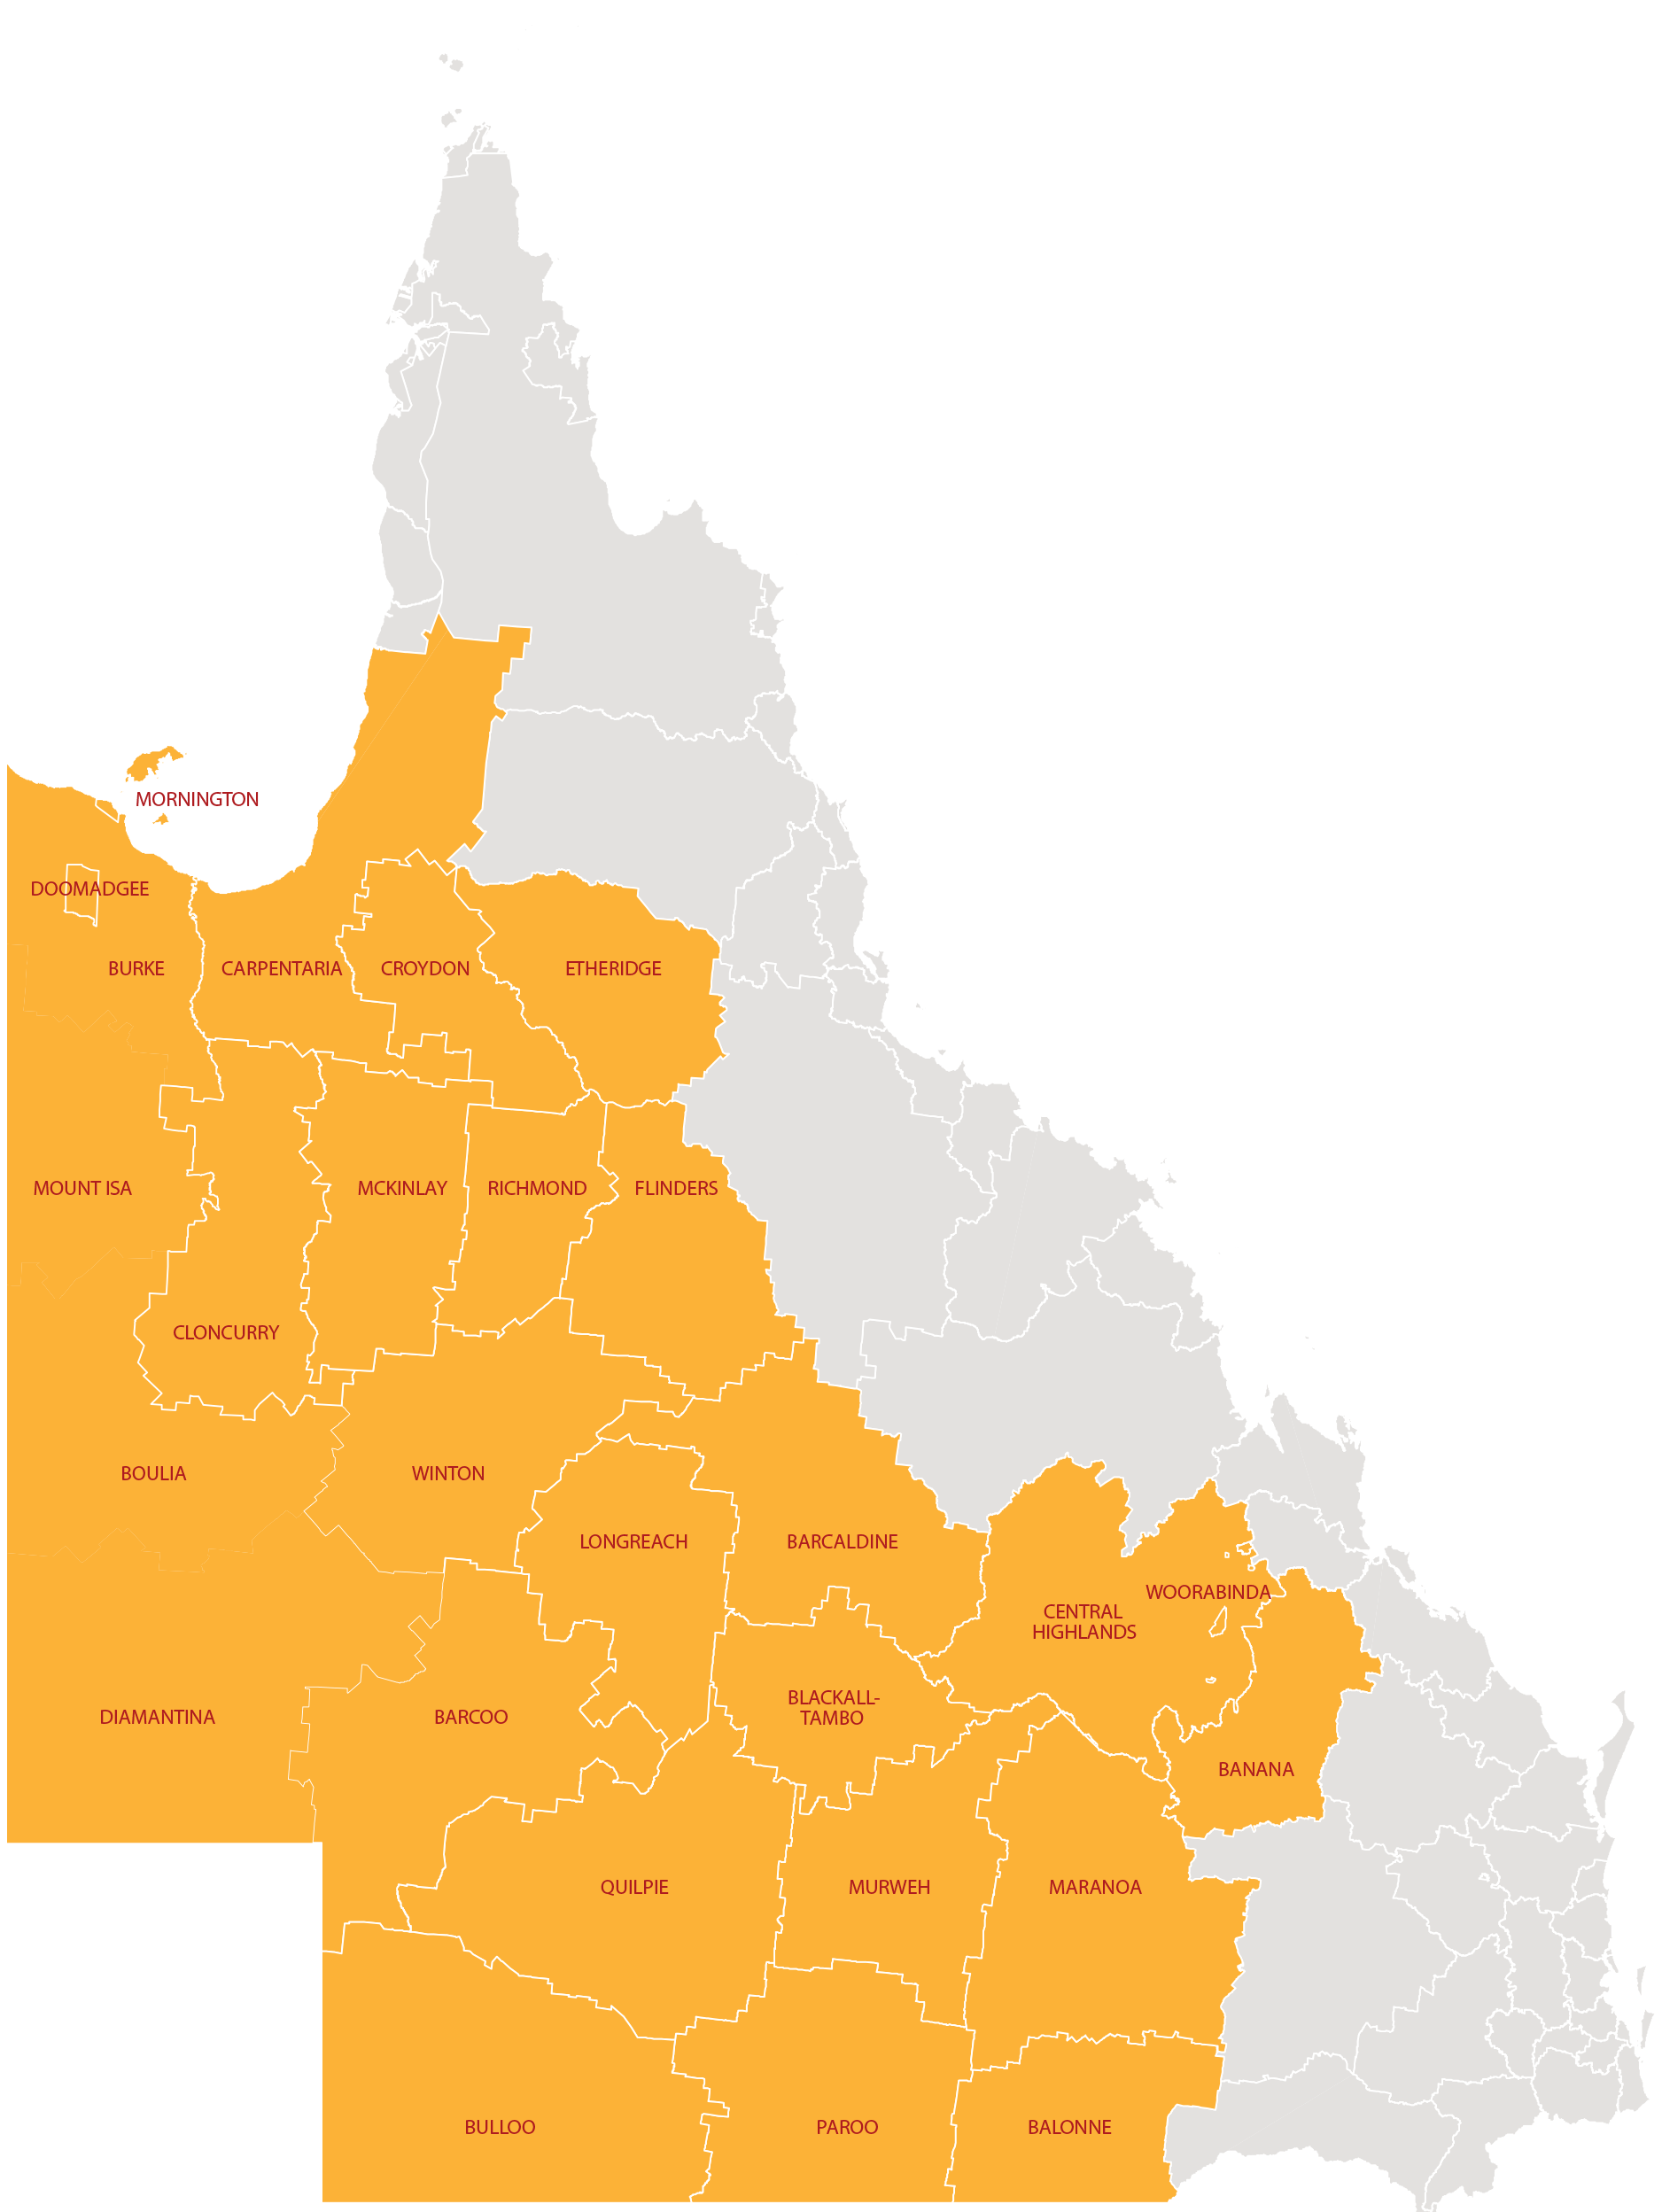 Outback Queensland is defined as the event host location within the Local Government Areas of: Balonne Shire Council, Banana Shire Council, Barcaldine Regional Council, Barcoo Shire Council, Blackall–Tambo Regional Council, Boulia Shire Council, Bulloo Shire Council, Burke Shire Council, Carpentaria Shire Council, Central Highlands Regional Council, Cloncurry Shire Council, Croydon Shire Council, Diamantina Shire Council, Doomadgee Aboriginal Shire Council, Etheridge Shire Council, Flinders Shire Council, Longreach Regional Council, Maranoa Regional Council, McKinlay Shire Council, Mornington Shire Council, Mount Isa City Council, Murweh Shire Council, Paroo Shire Council, Quilpie Shire Council, Richmond Shire Council, Winton Shire Council, Woorabinda Aboriginal Shire Council.